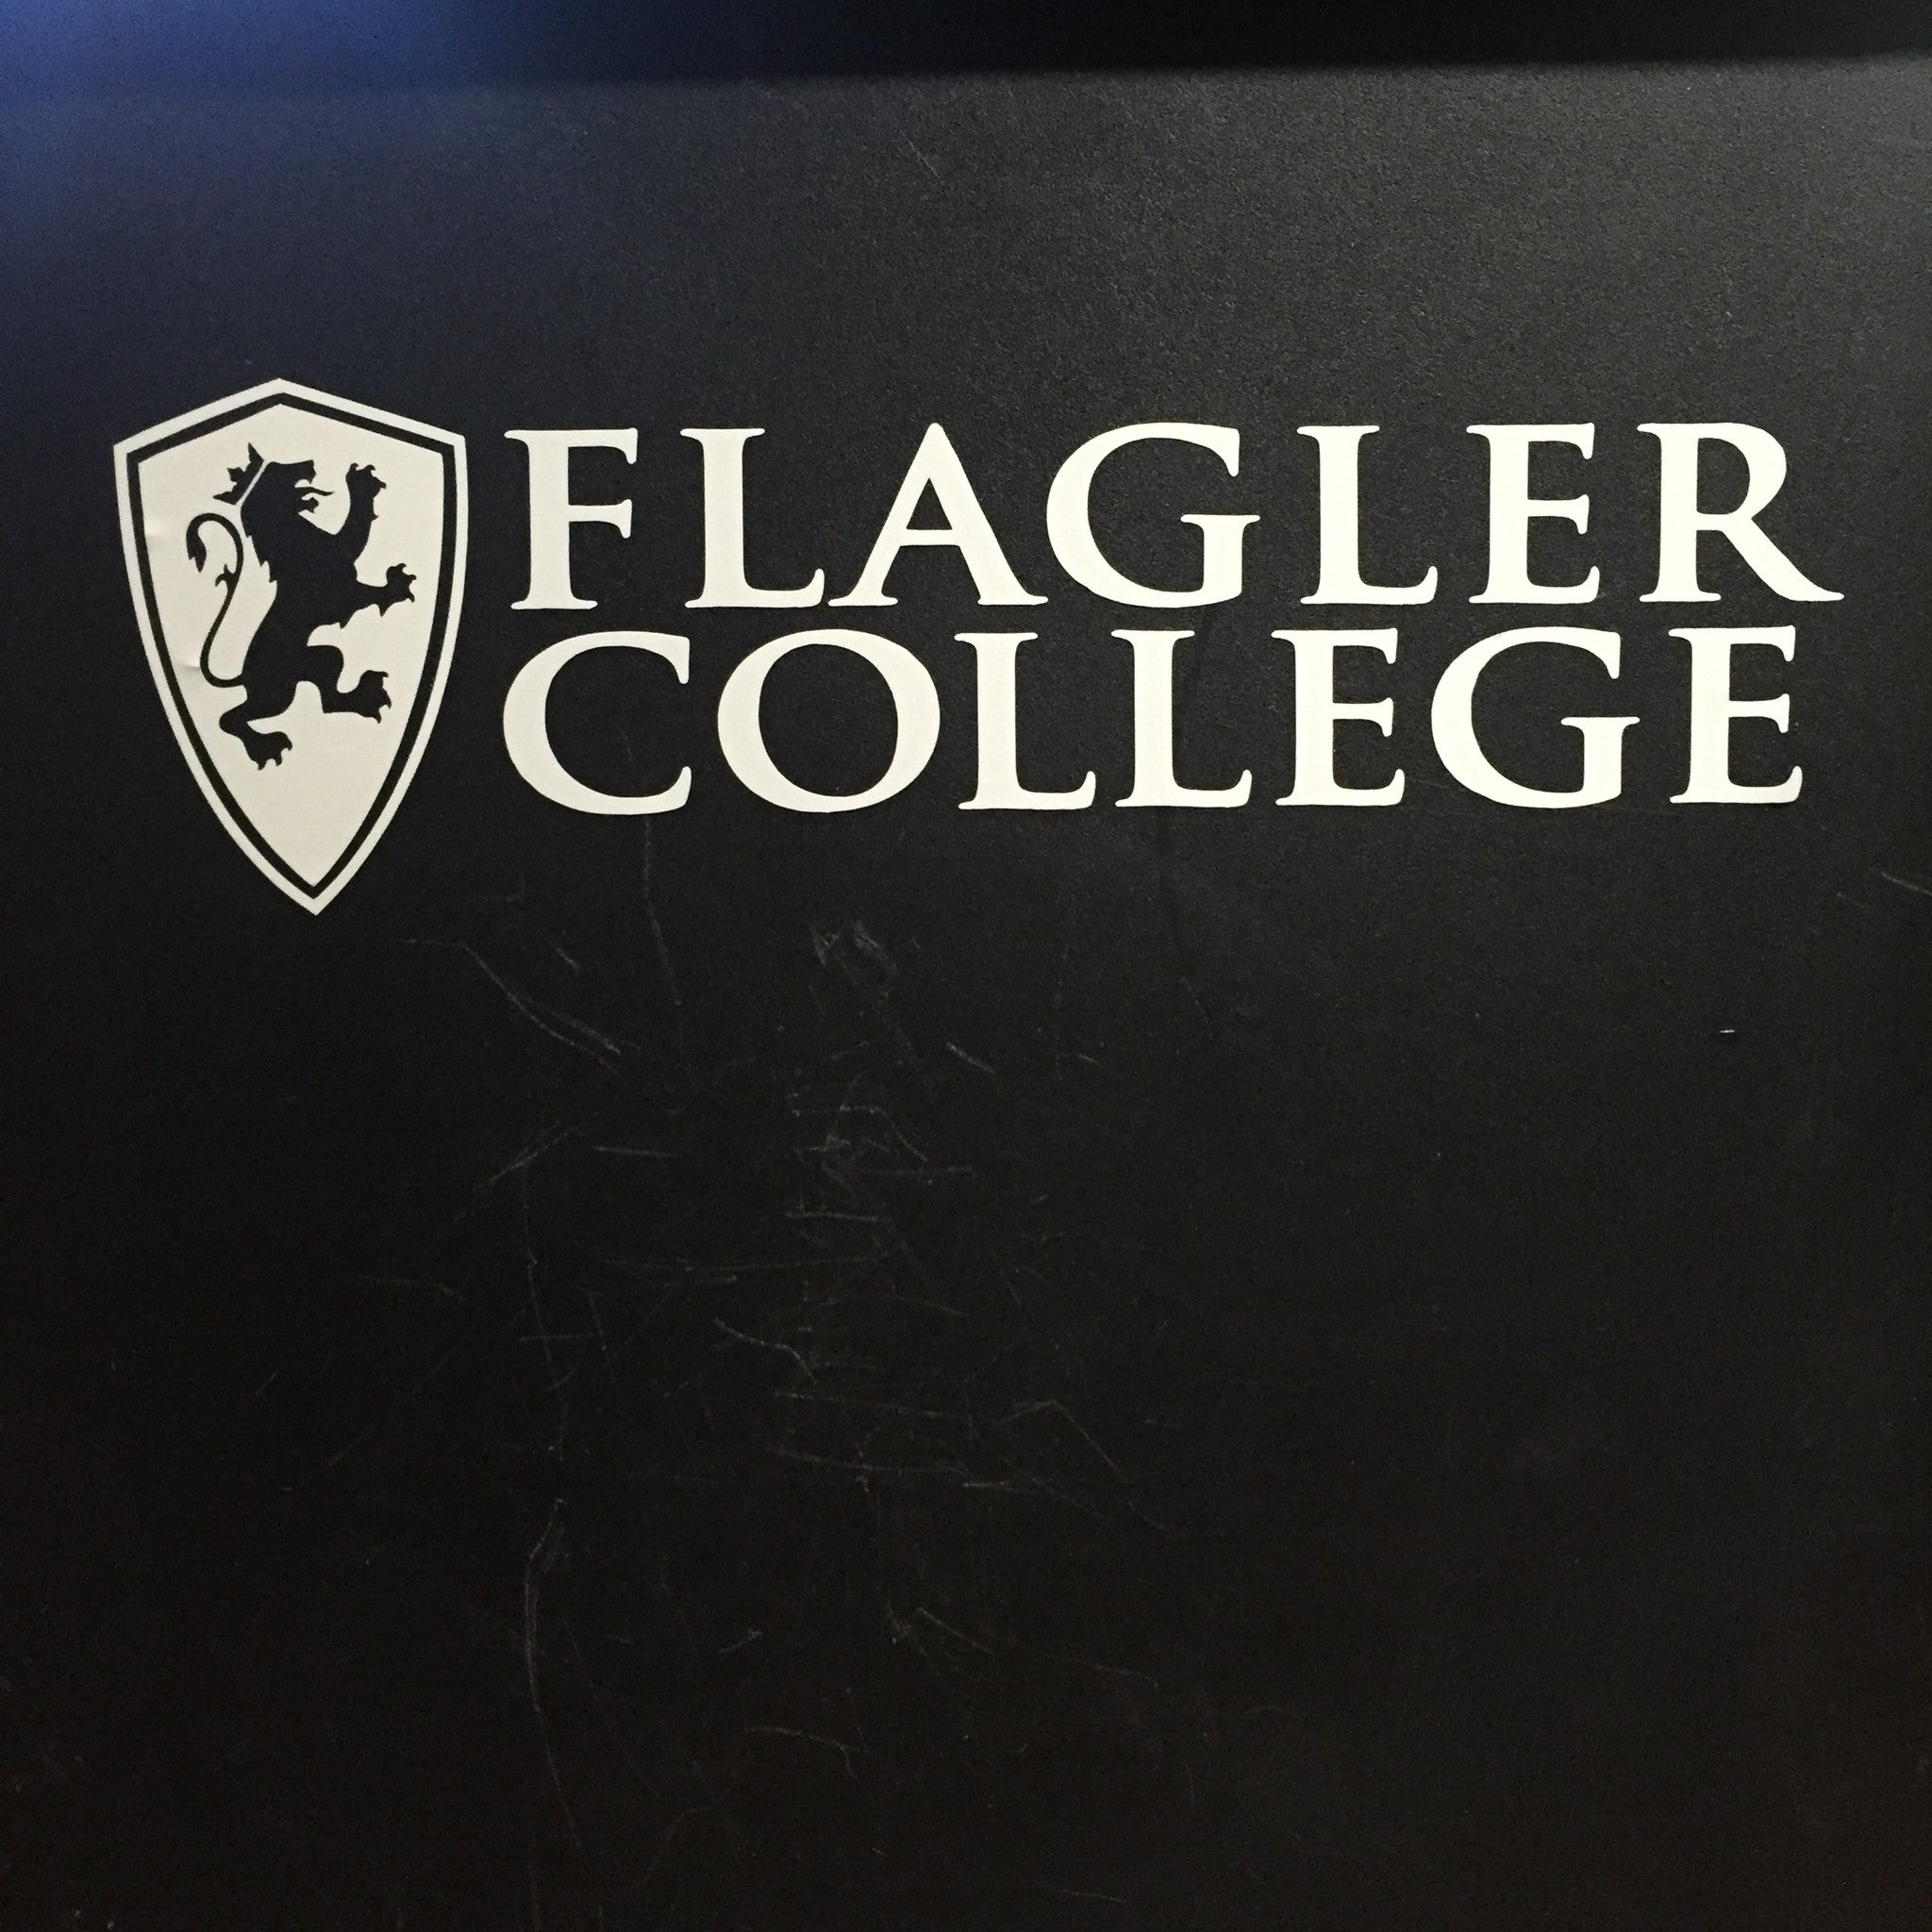 White Flagler college and shield decal